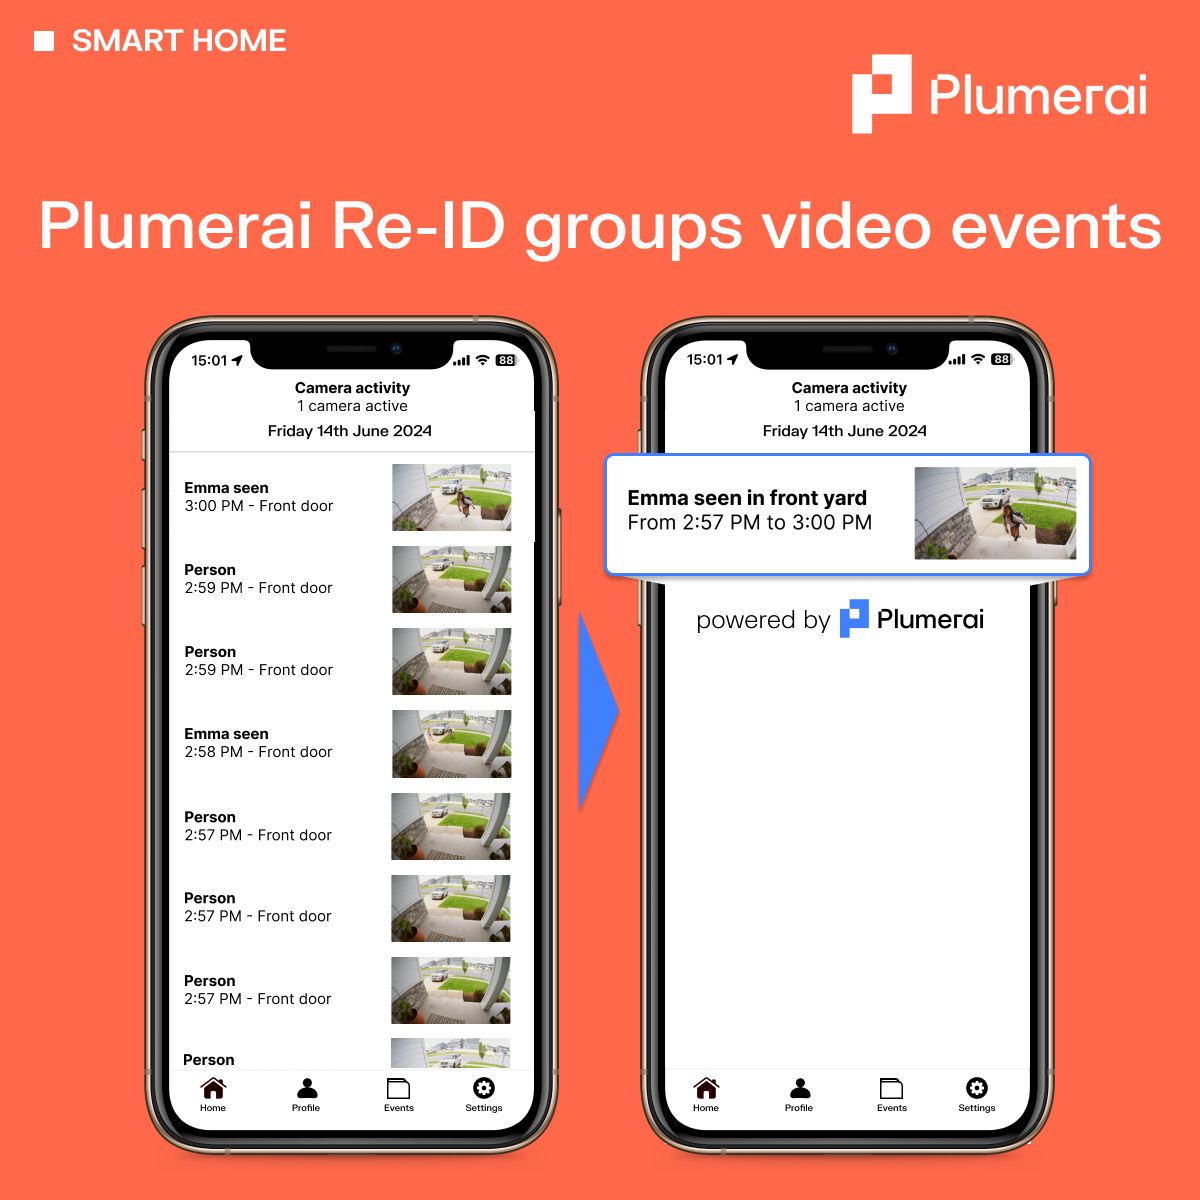 Plumerai Re-ID groups video events